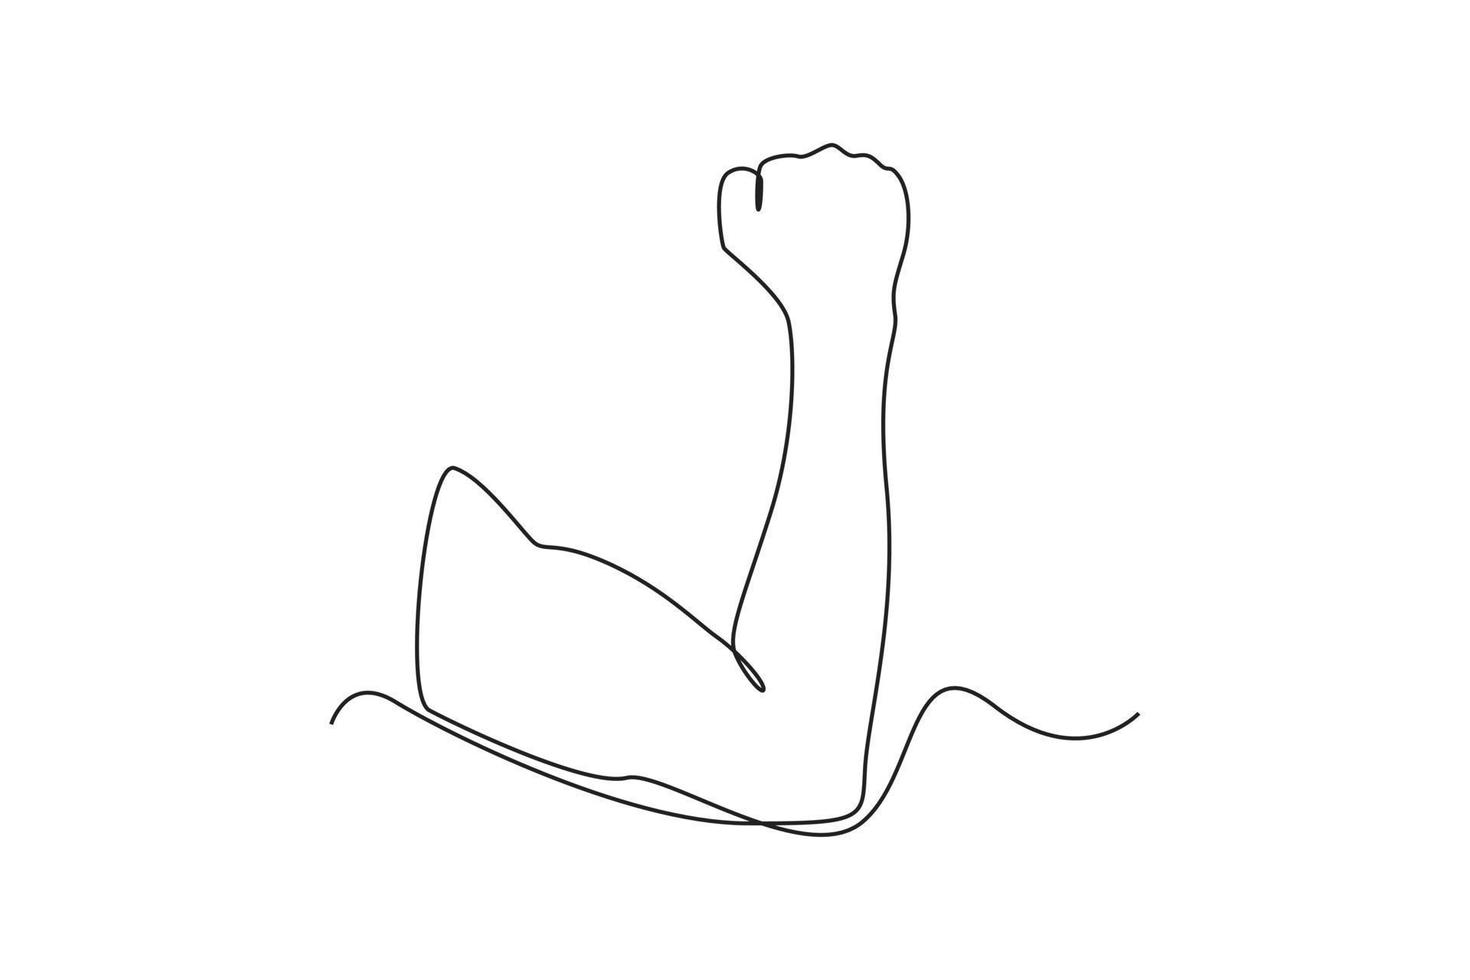 Single one line drawing arm organ. Human organ concept. Continuous line draw design graphic vector illustration.